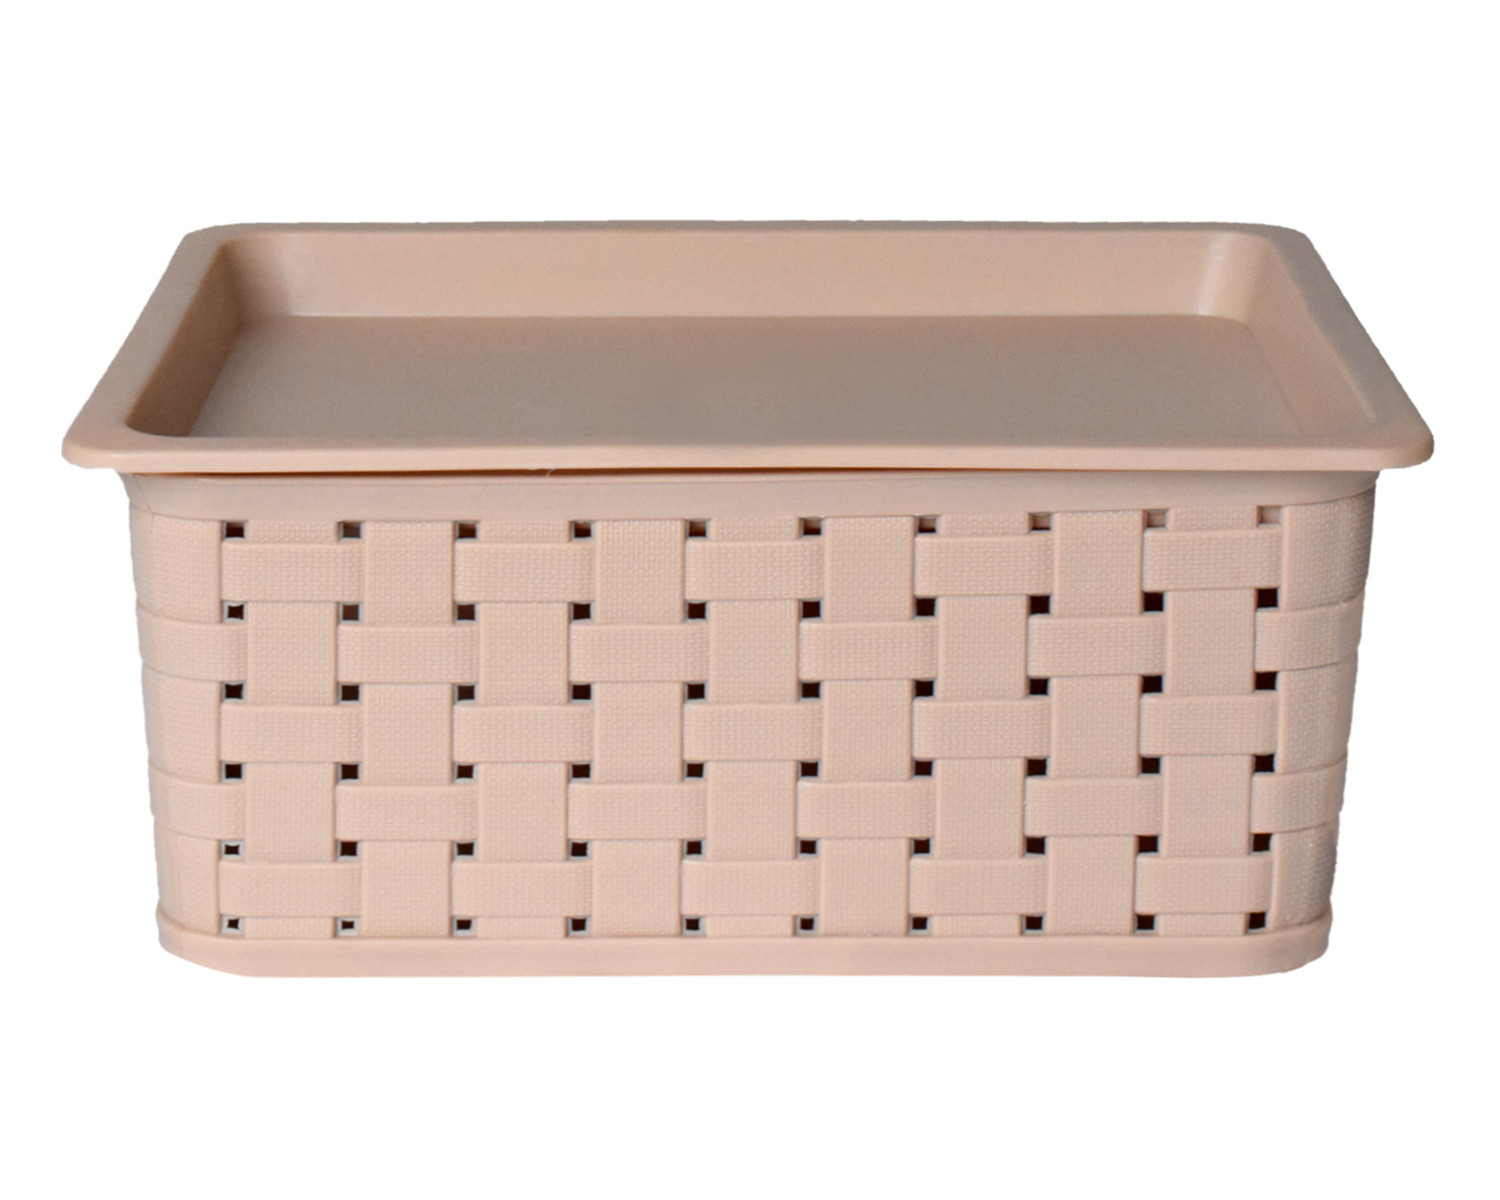 Kuber Industries BPA Free Attractive Design Multipurpose Large Trendy Storage Basket With Lid|Material-Plastic|Color-Gray,Beige|Pack of 2